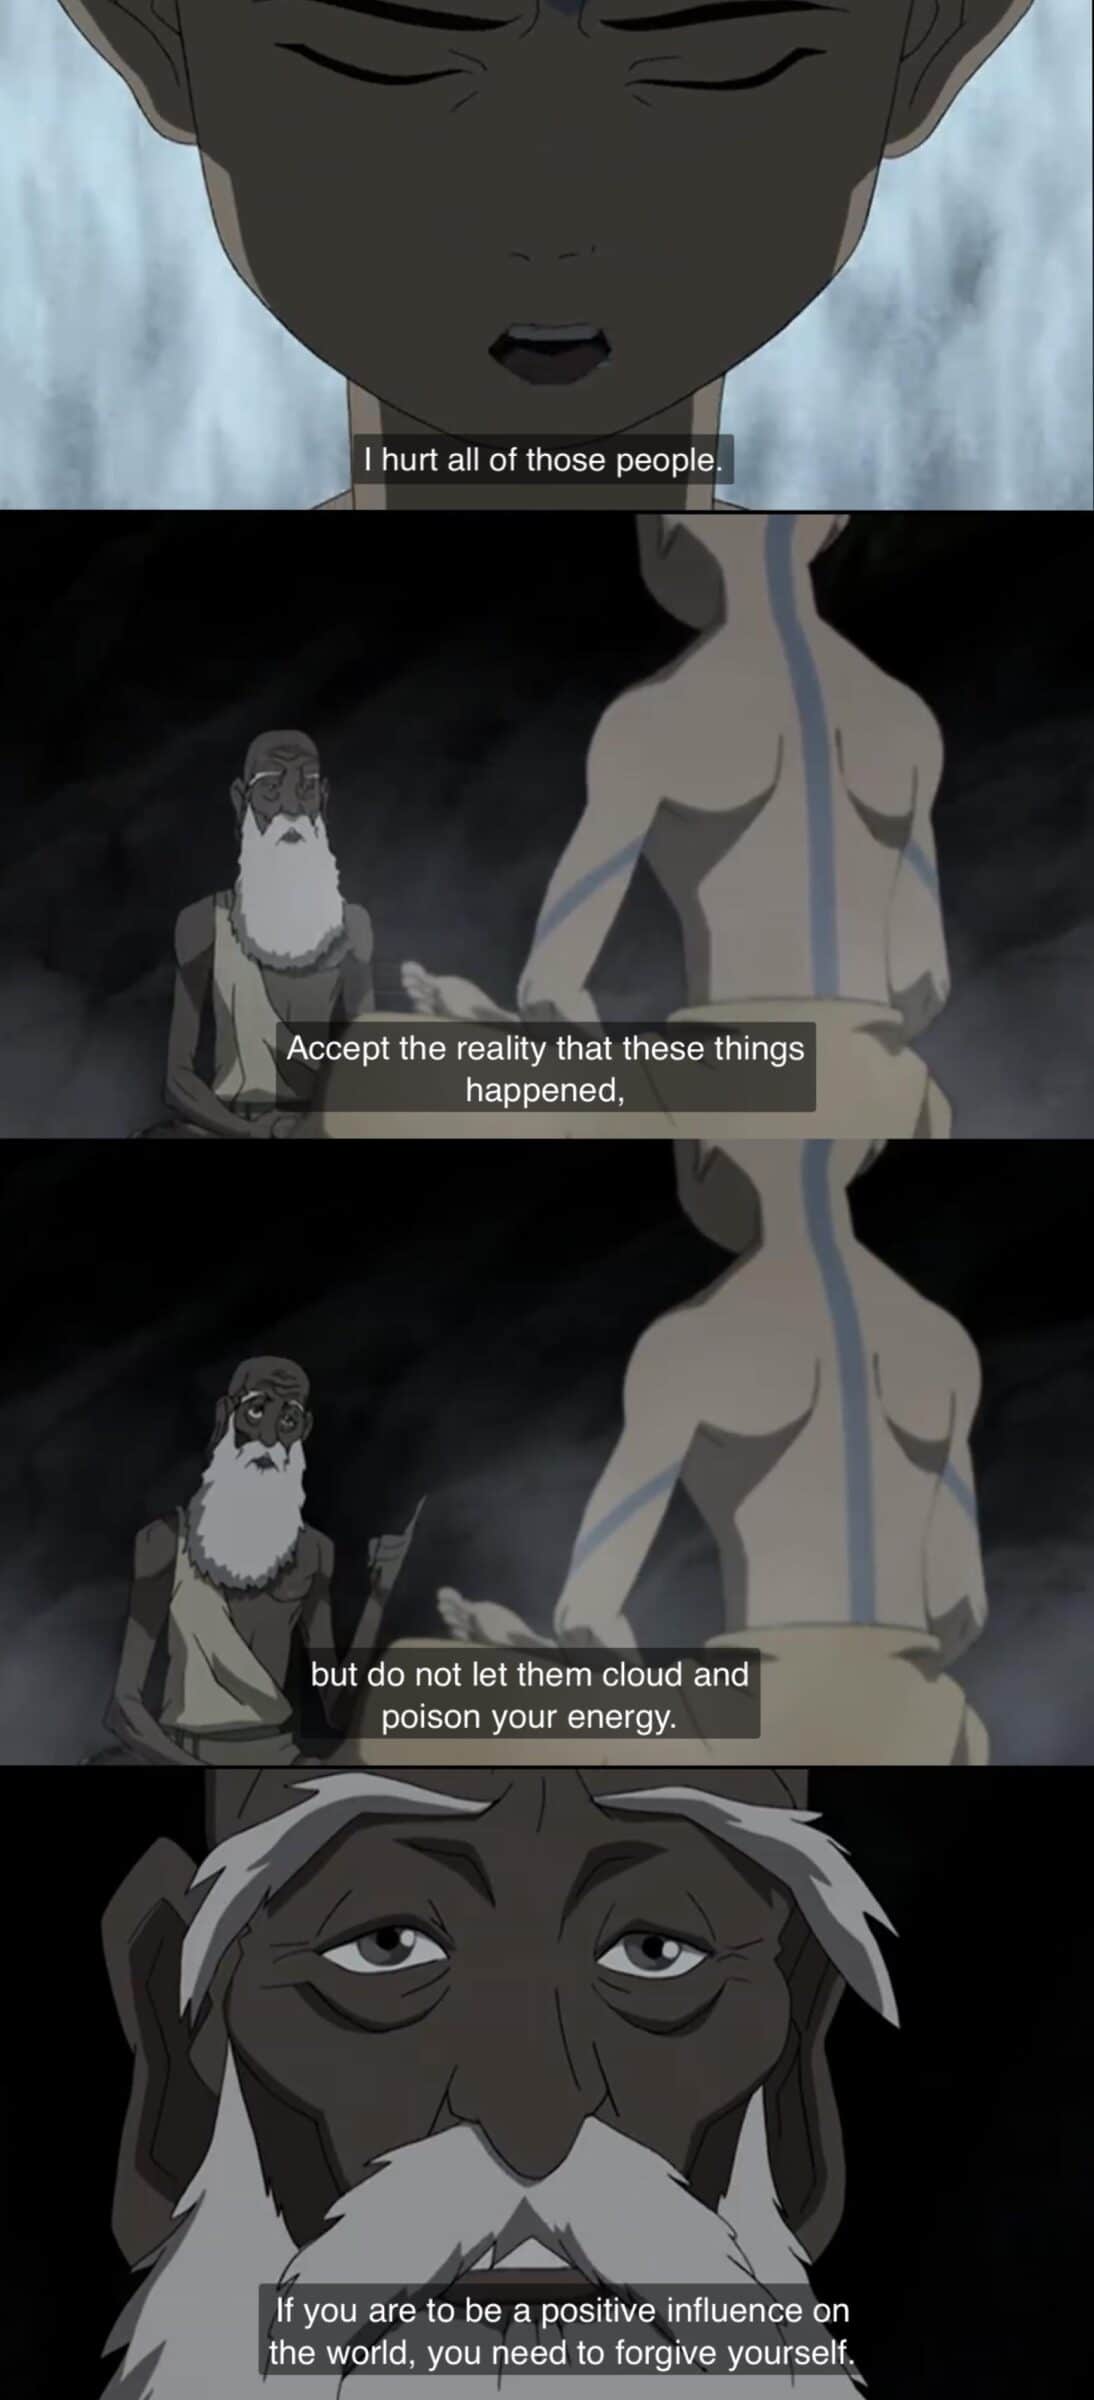 Wholesome memes, Iroh, Avatar, ATLA, Aang, Uncle Iroh Wholesome Memes Wholesome memes, Iroh, Avatar, ATLA, Aang, Uncle Iroh text: I hurt all of those people. Accept the reality that these things happened, but do not let them cloud and poison your energy. If you are to be a positive influence on the world, you need to forgive yourself 